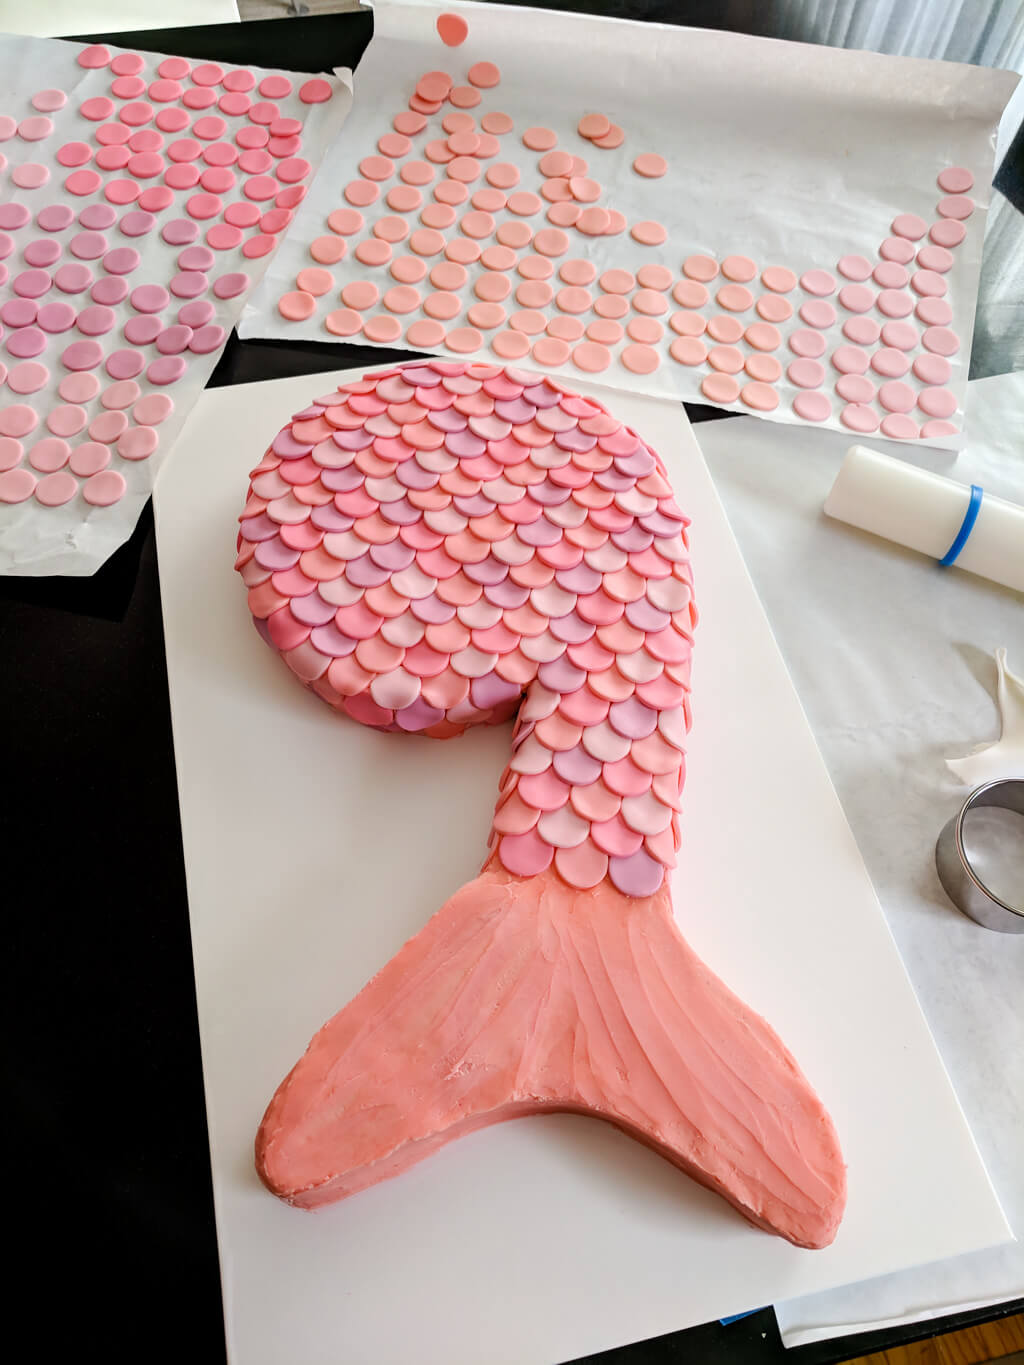 How to make a mermaid birthday cake with fondant scales